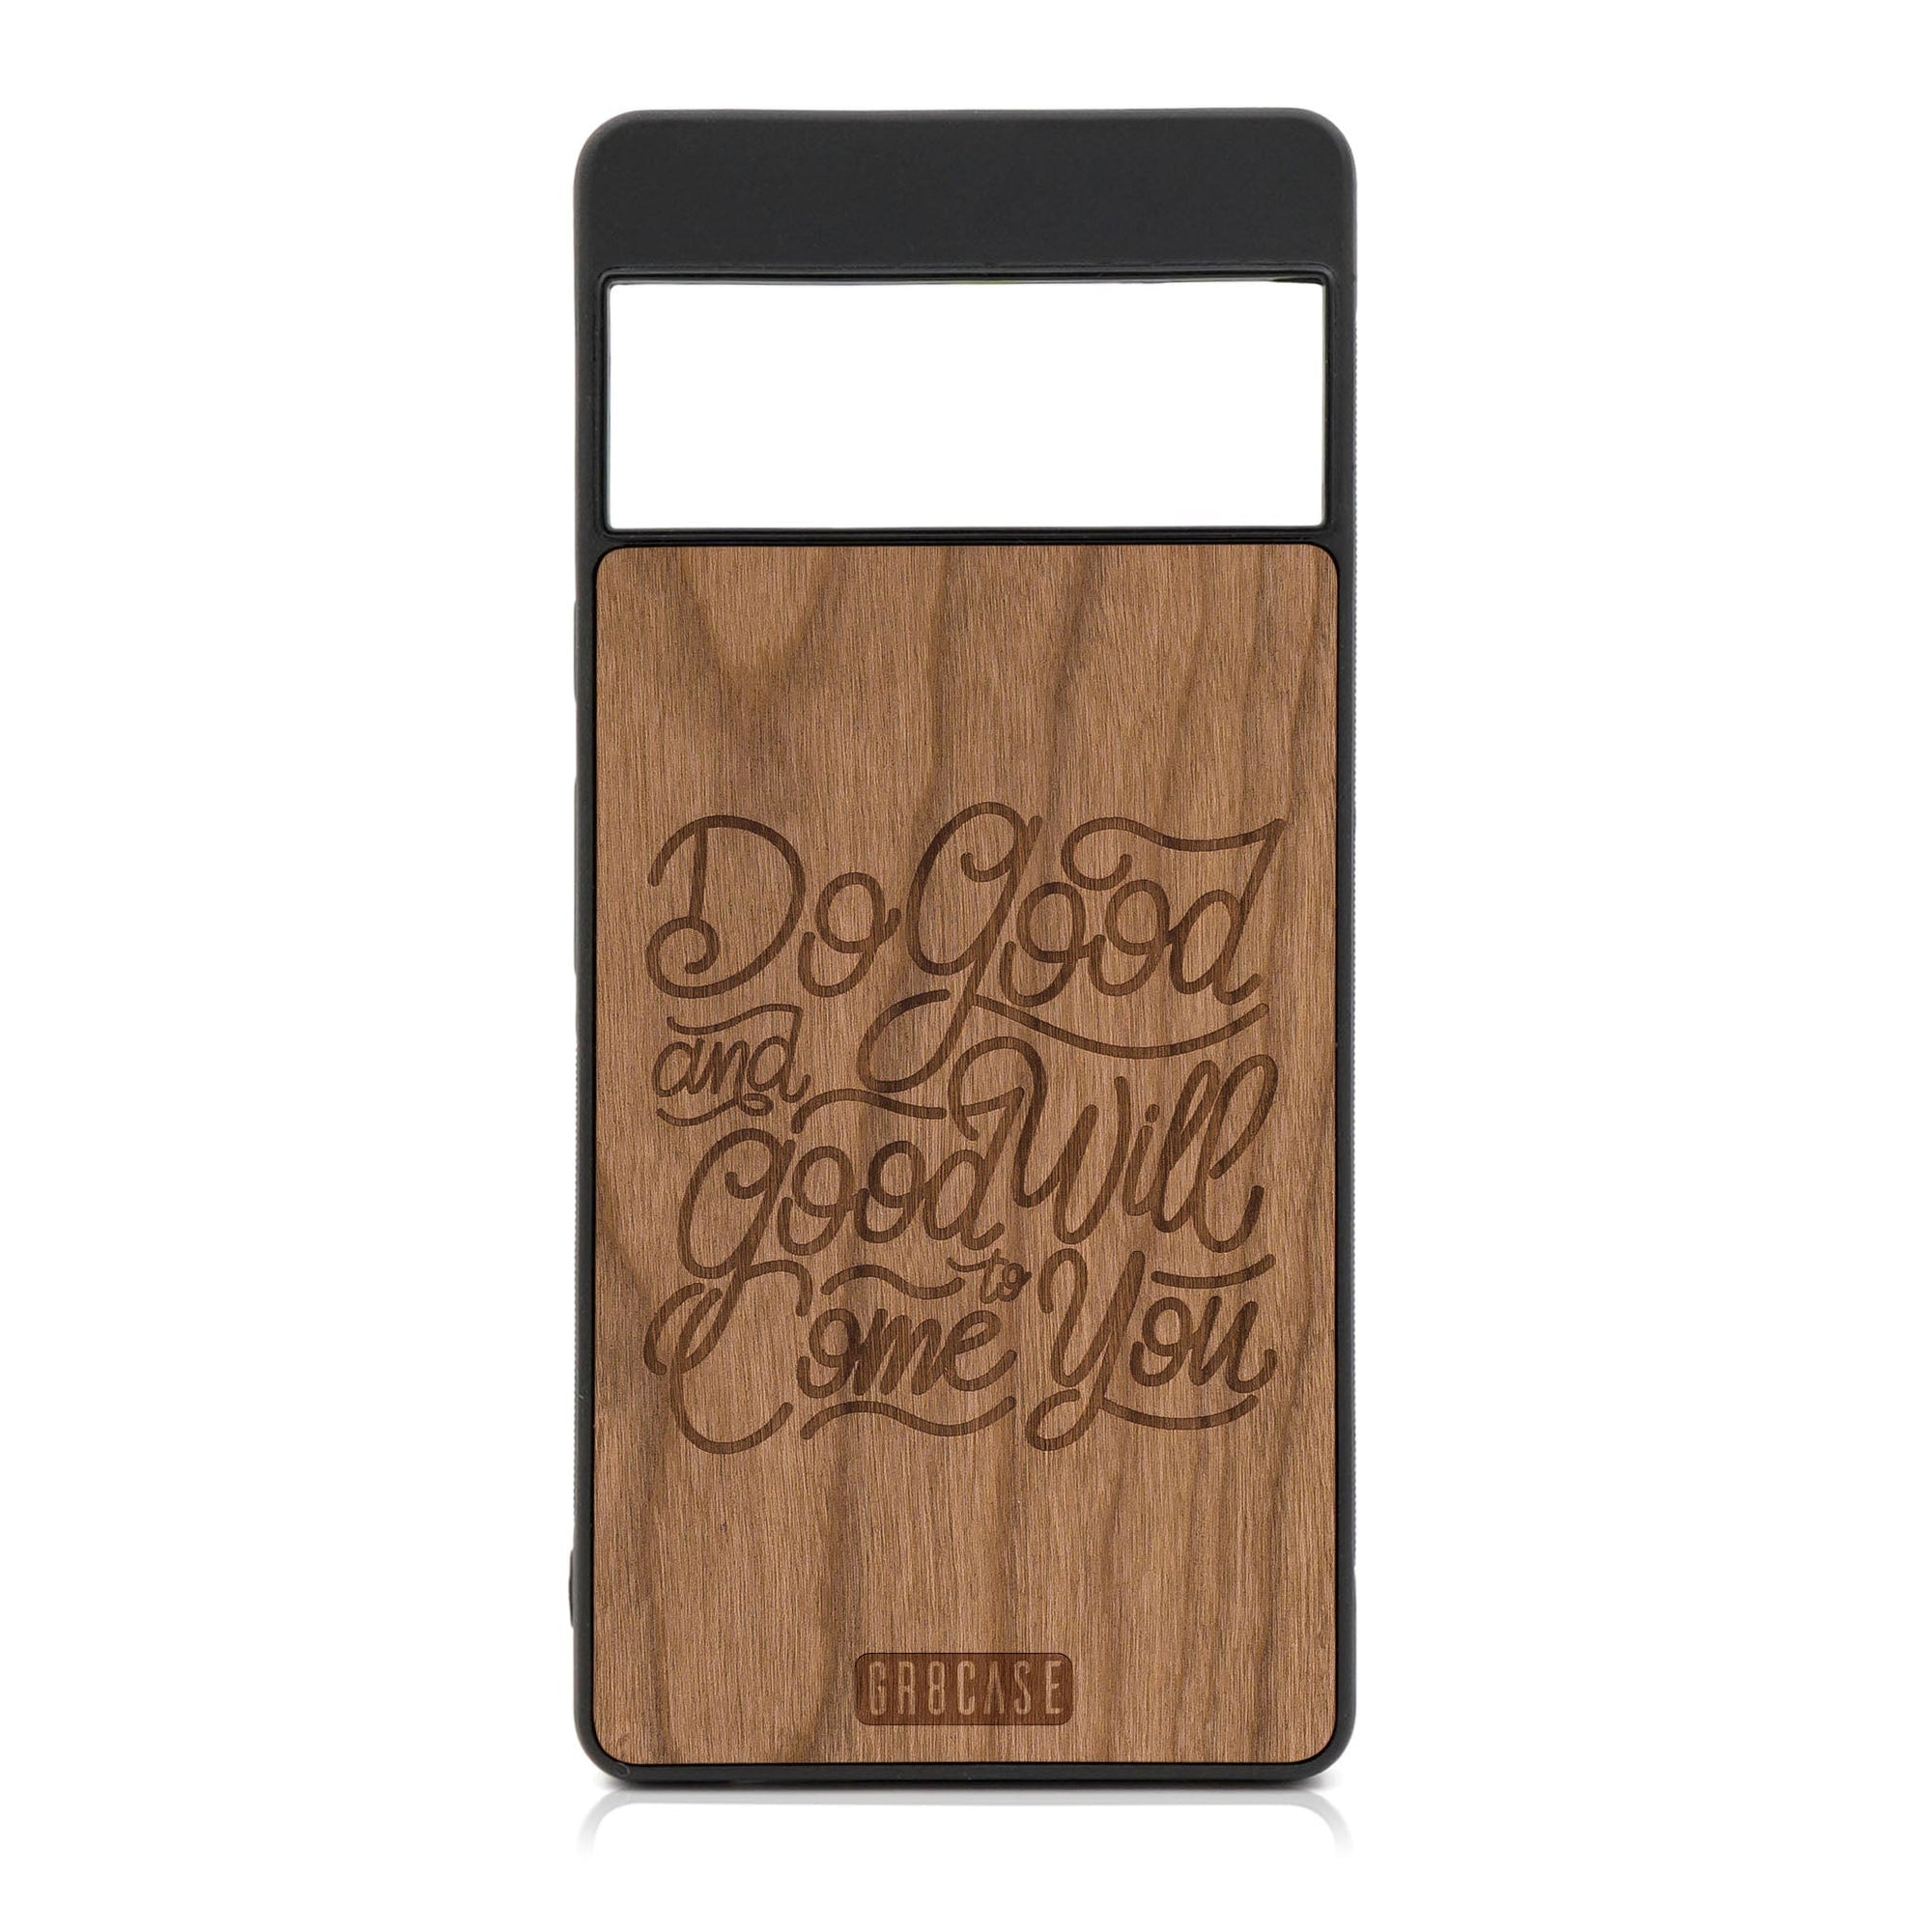 Do Good And Good Will Come To You Design Wood Case For Google Pixel 6A